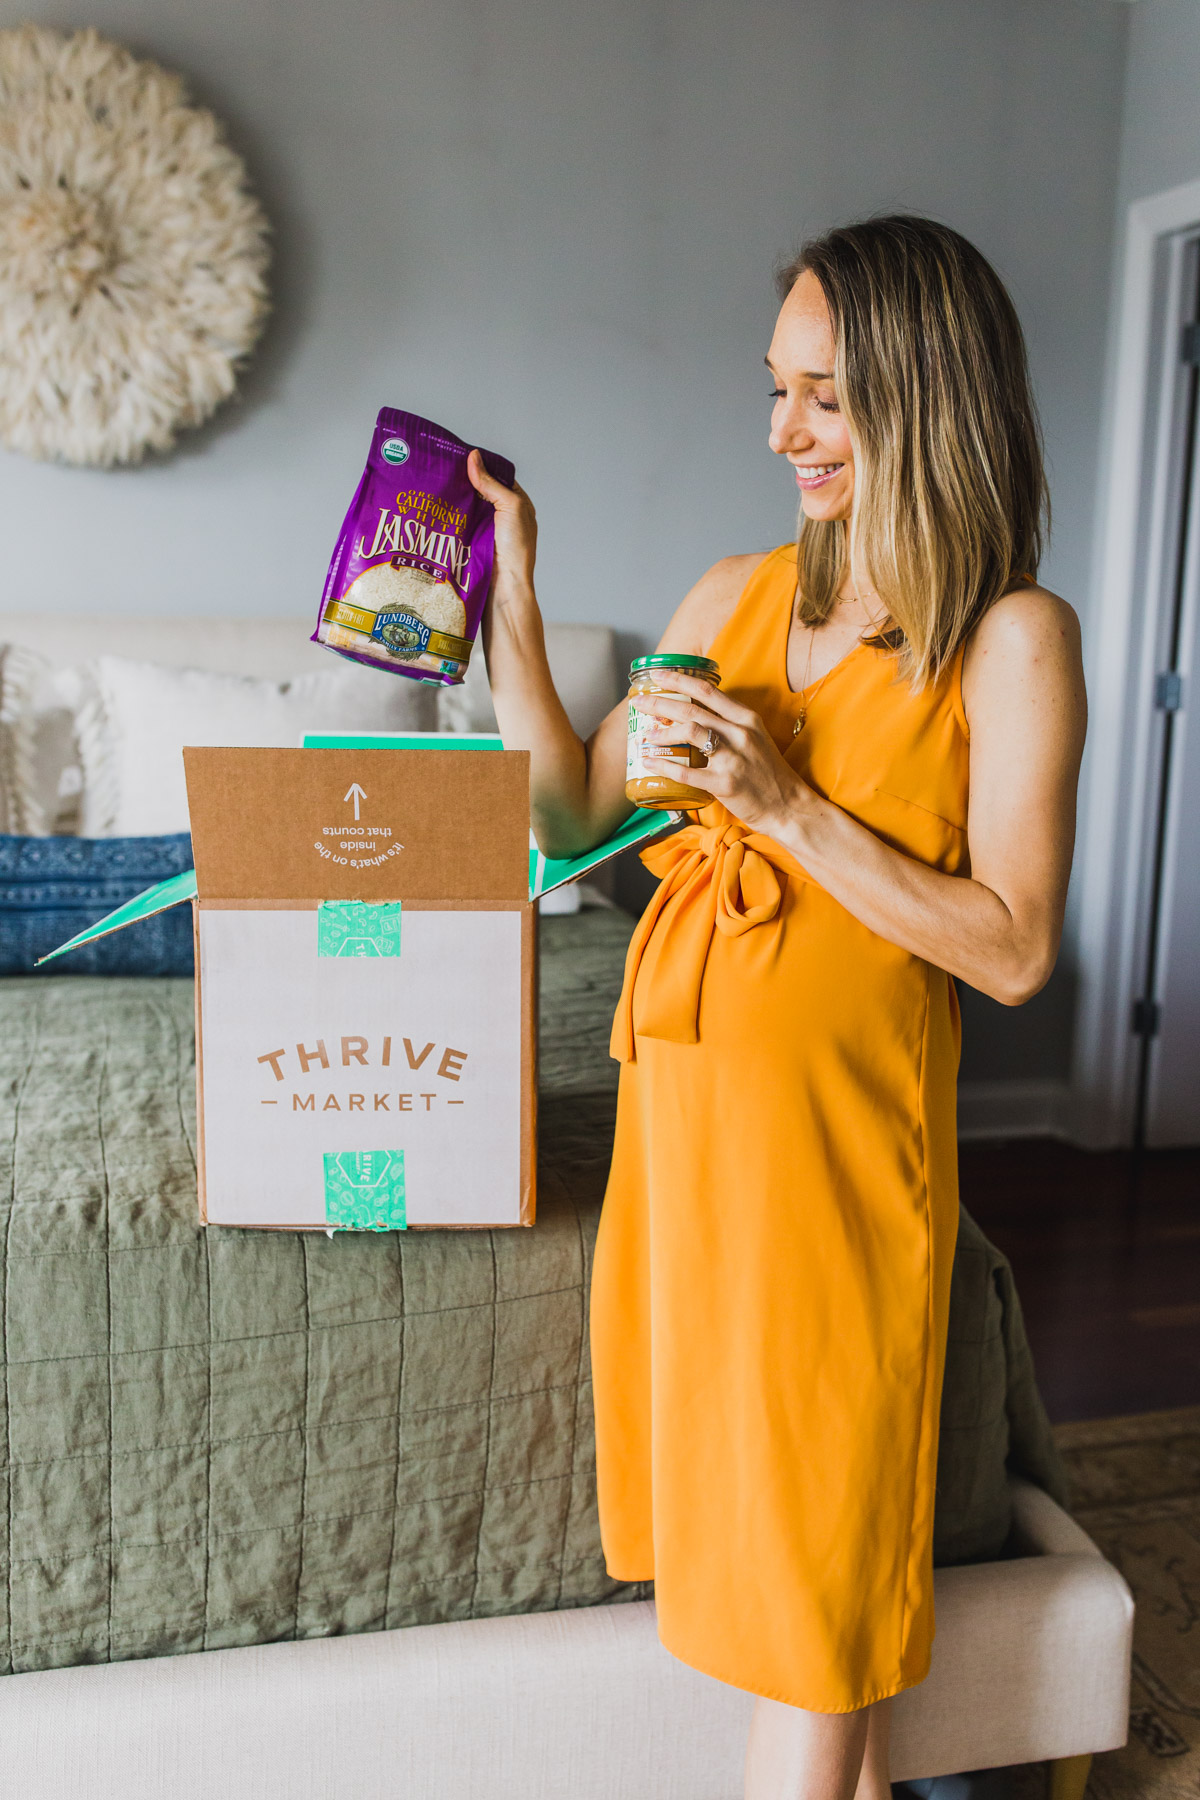 An honest Thrive Market review, a pantry essentials grocery delivery service, and all of our Thrive Market must haves. They have the best sustainable brands, especially for diets like keto, paleo, whole30, vegan, gluten-free and clean eating snacks. Click through for my list of the best things to buy on Thrive Market. #cleaneating #thrivemarket #healthyliving